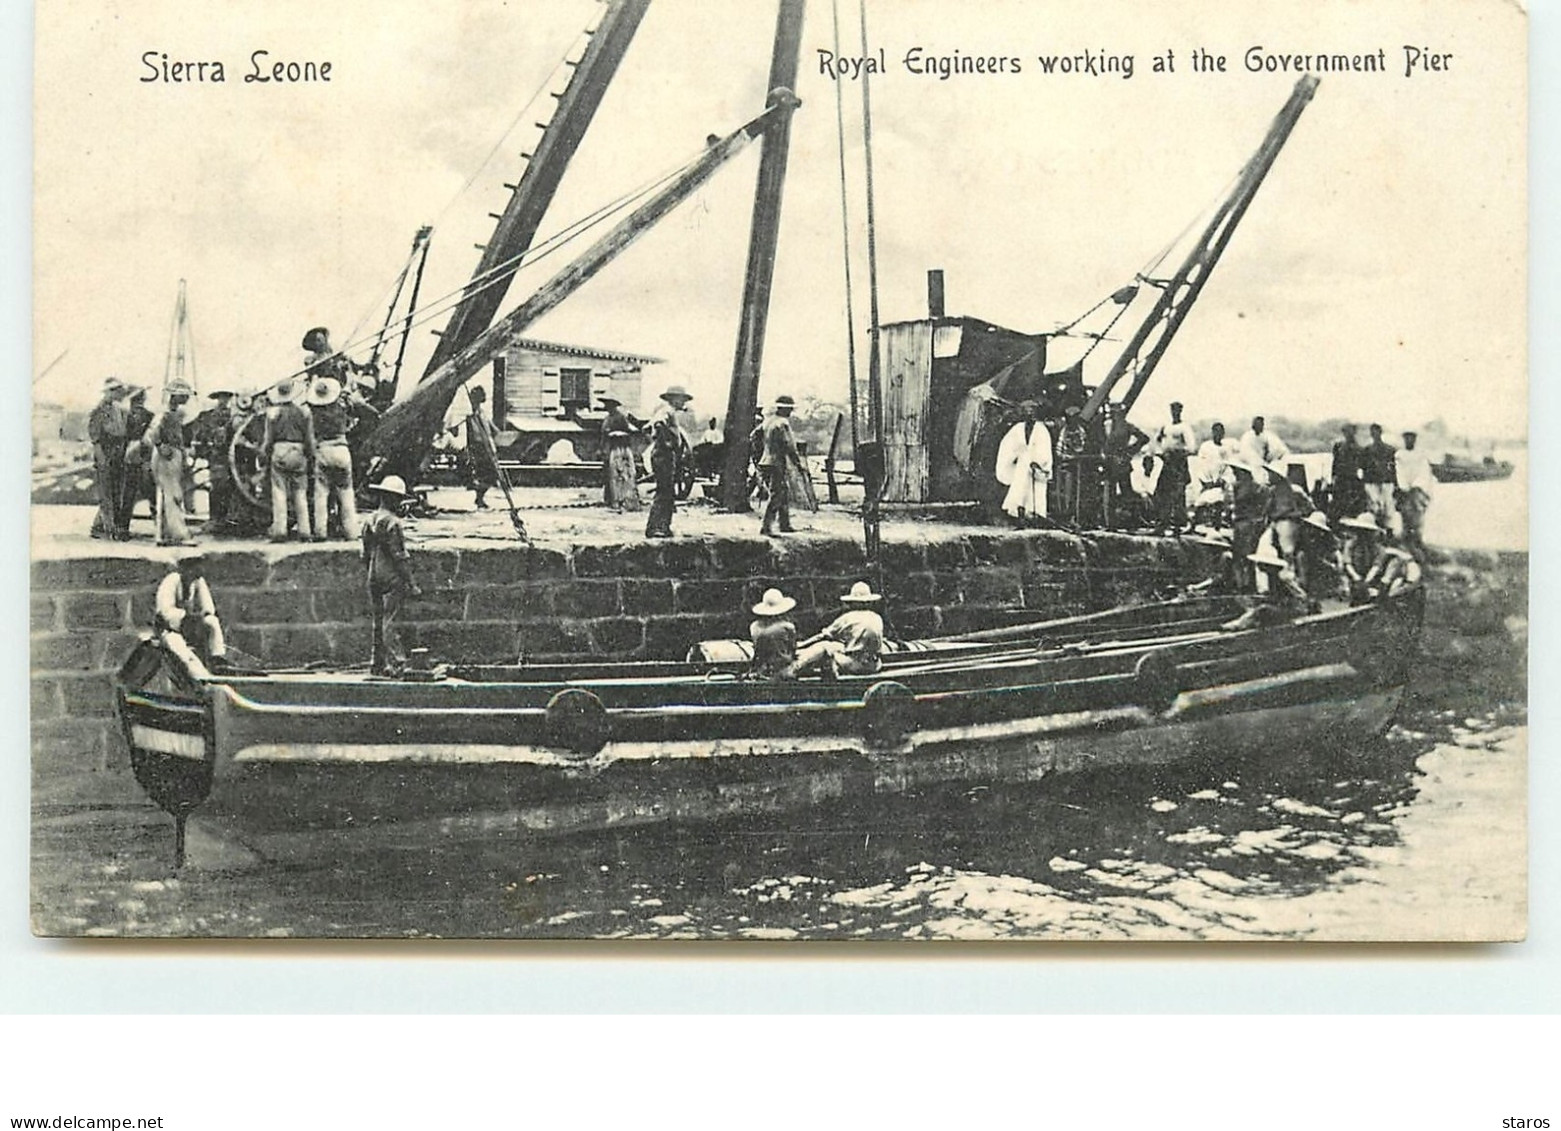 Royal Engineers Working At The Government Pier - Sierra Leona